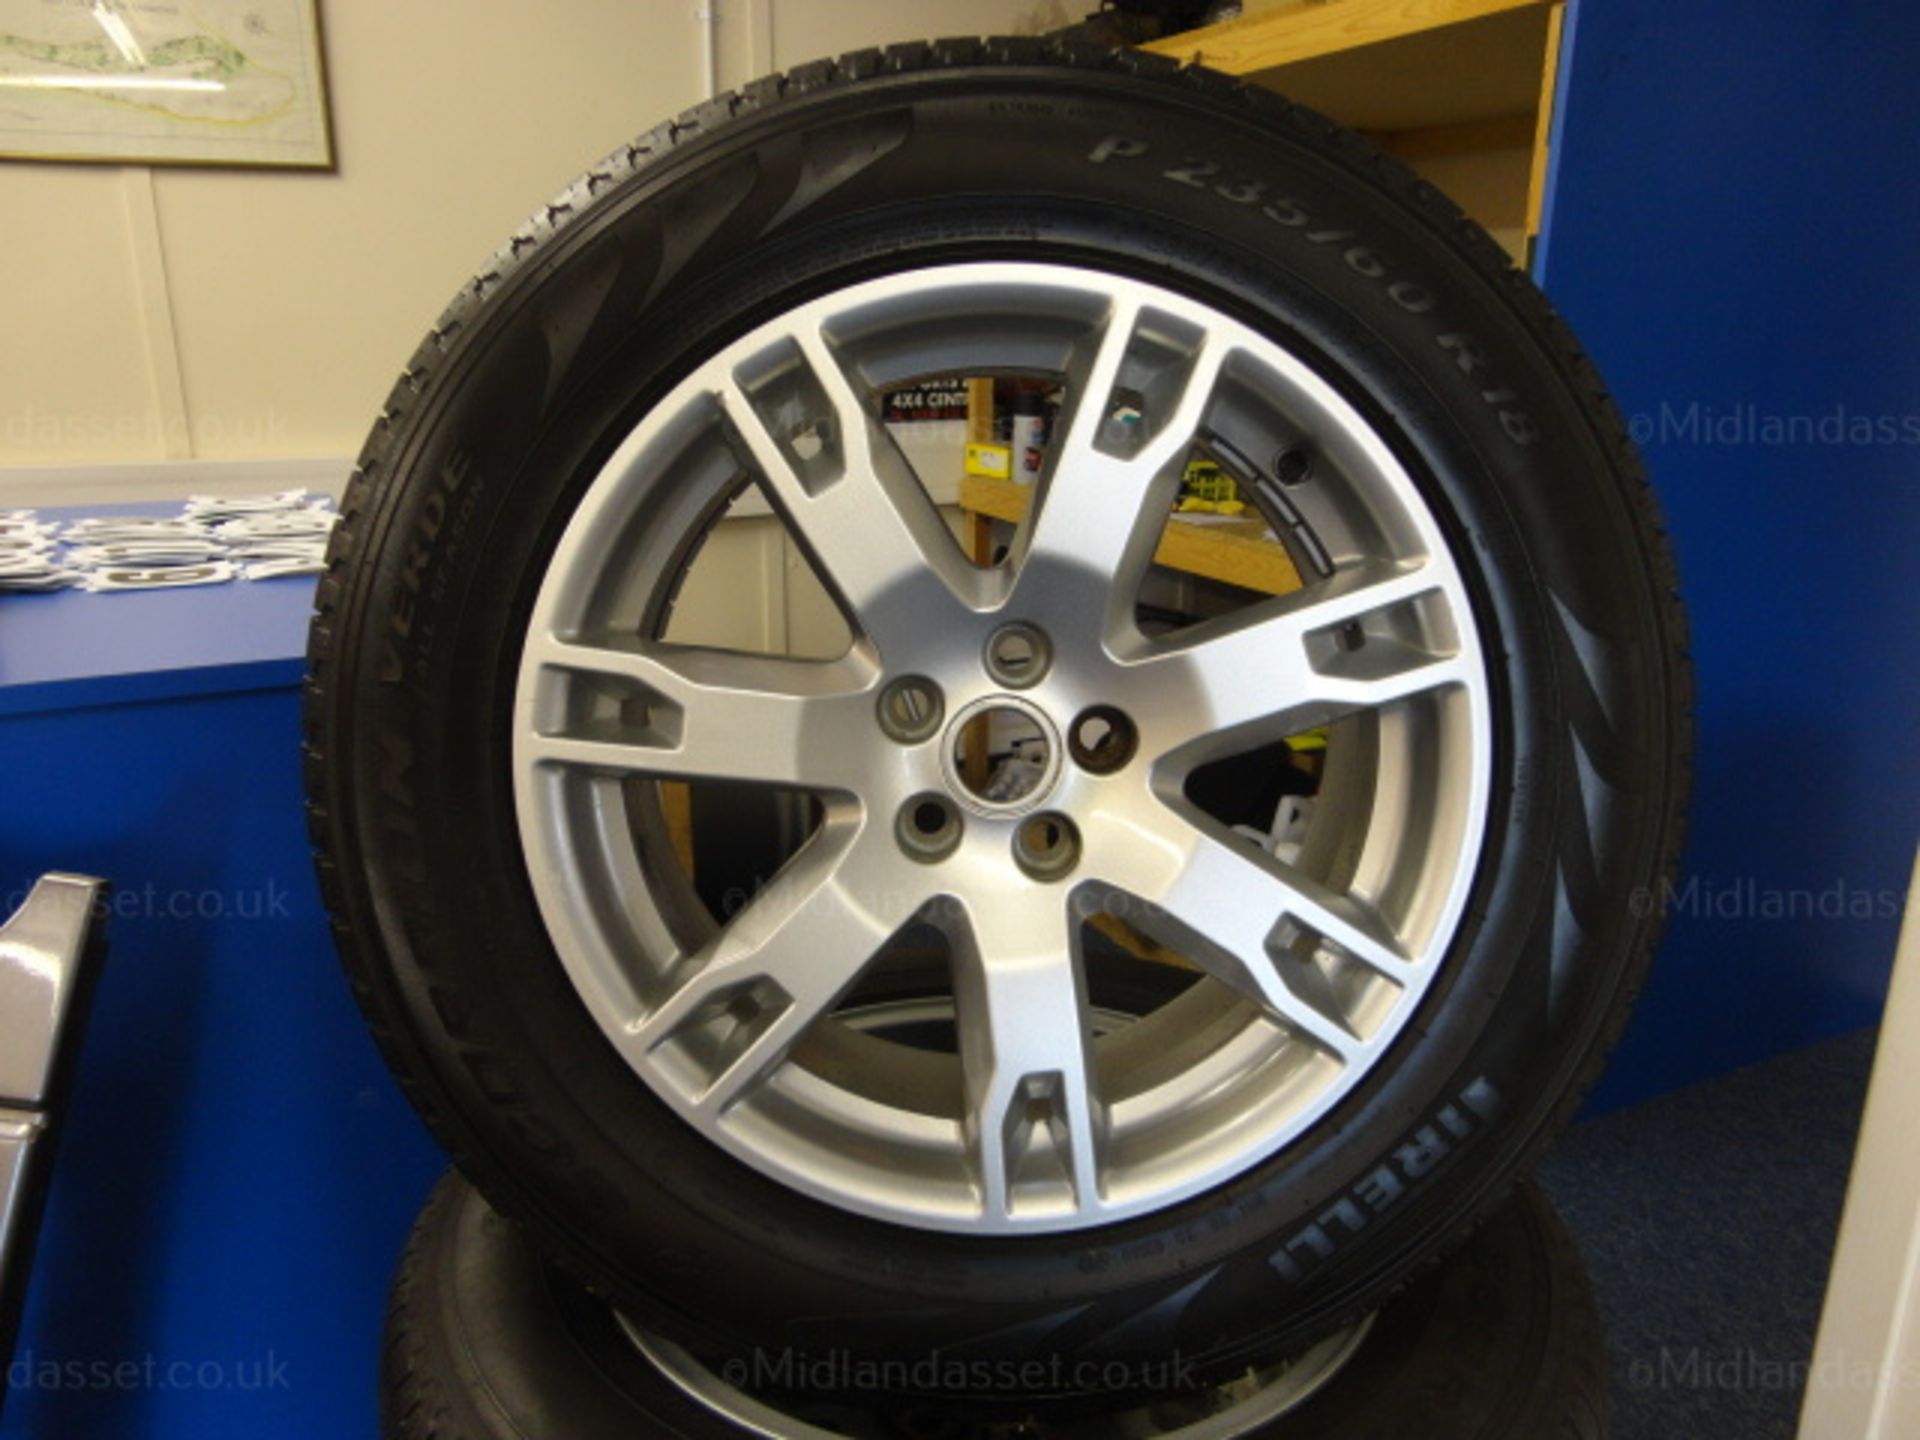 4 x 18" LAND ROVER DISCOVERY ALLOY WHEELS